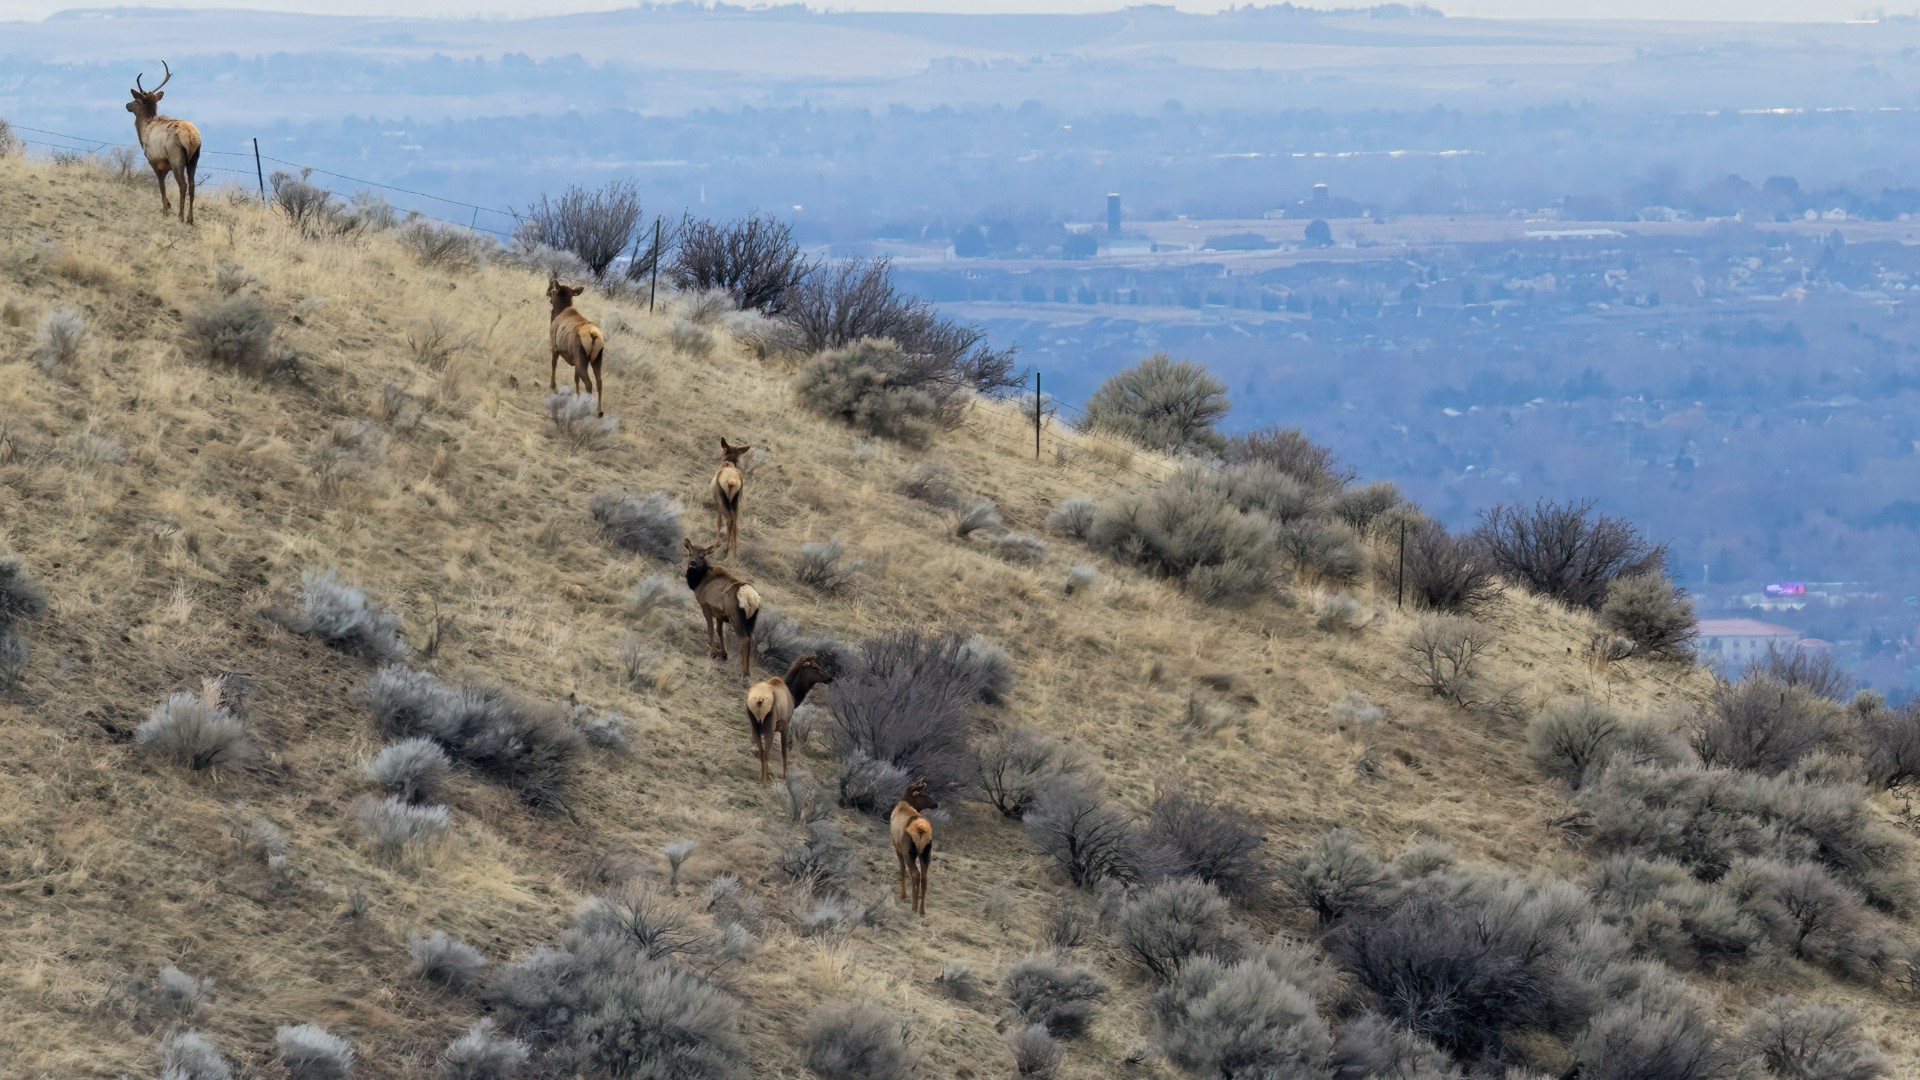 The Bureau of Land Management seeks public comment on its proposed purchase of 350 acres of land in the Boise Foothills.